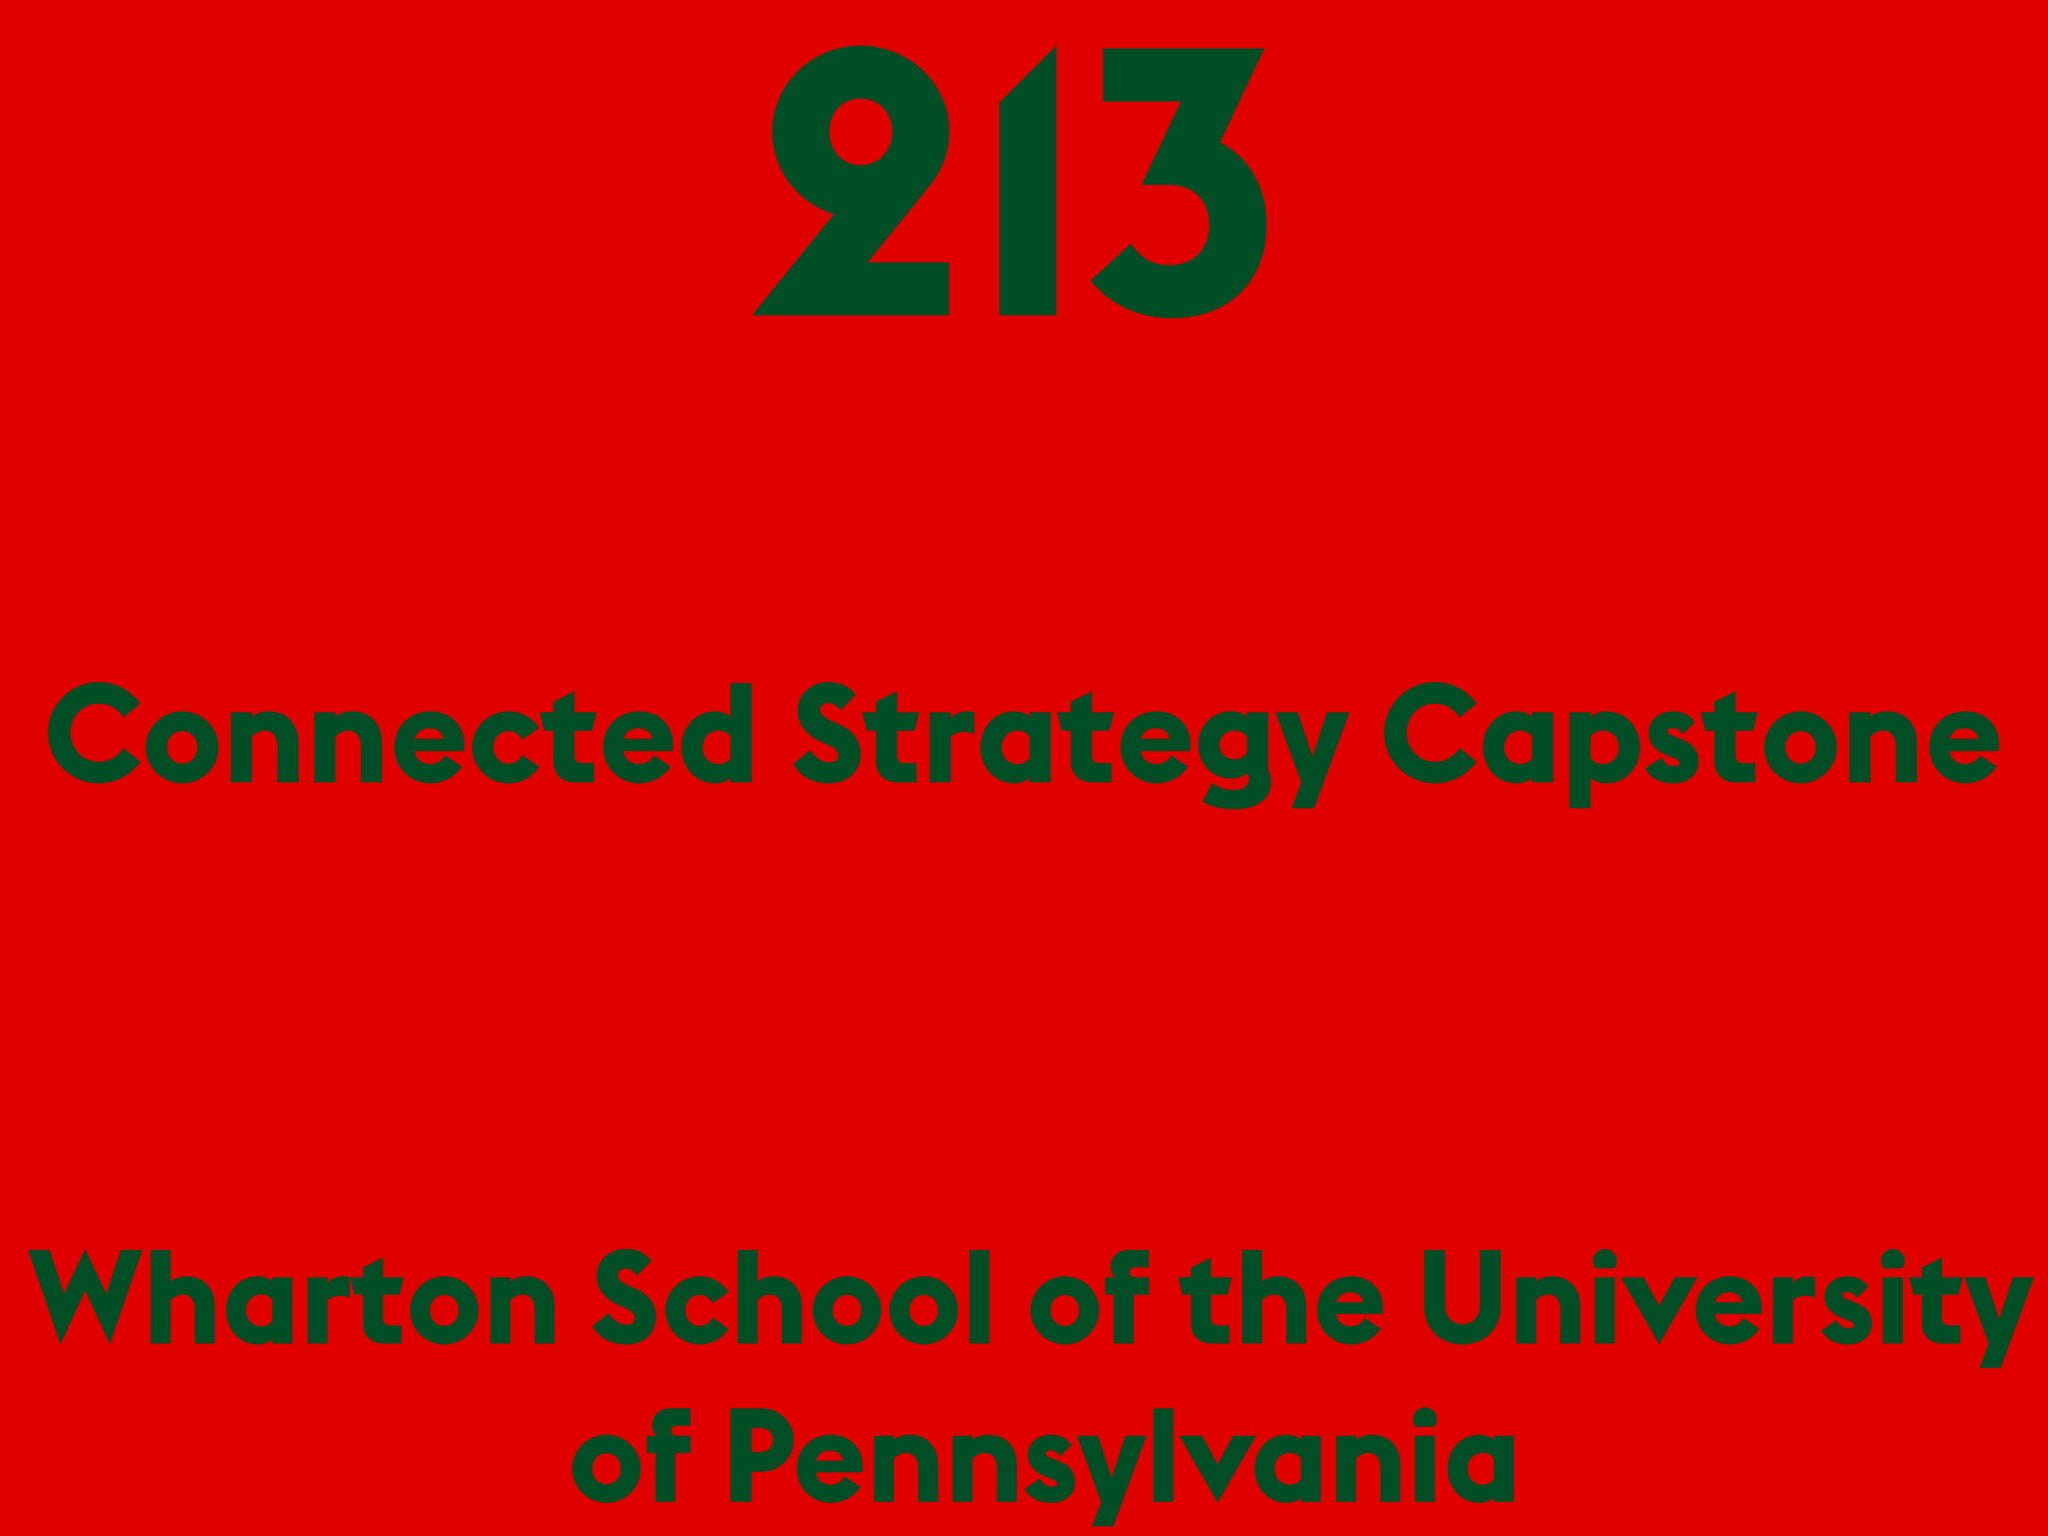 Connected Strategy Capstone